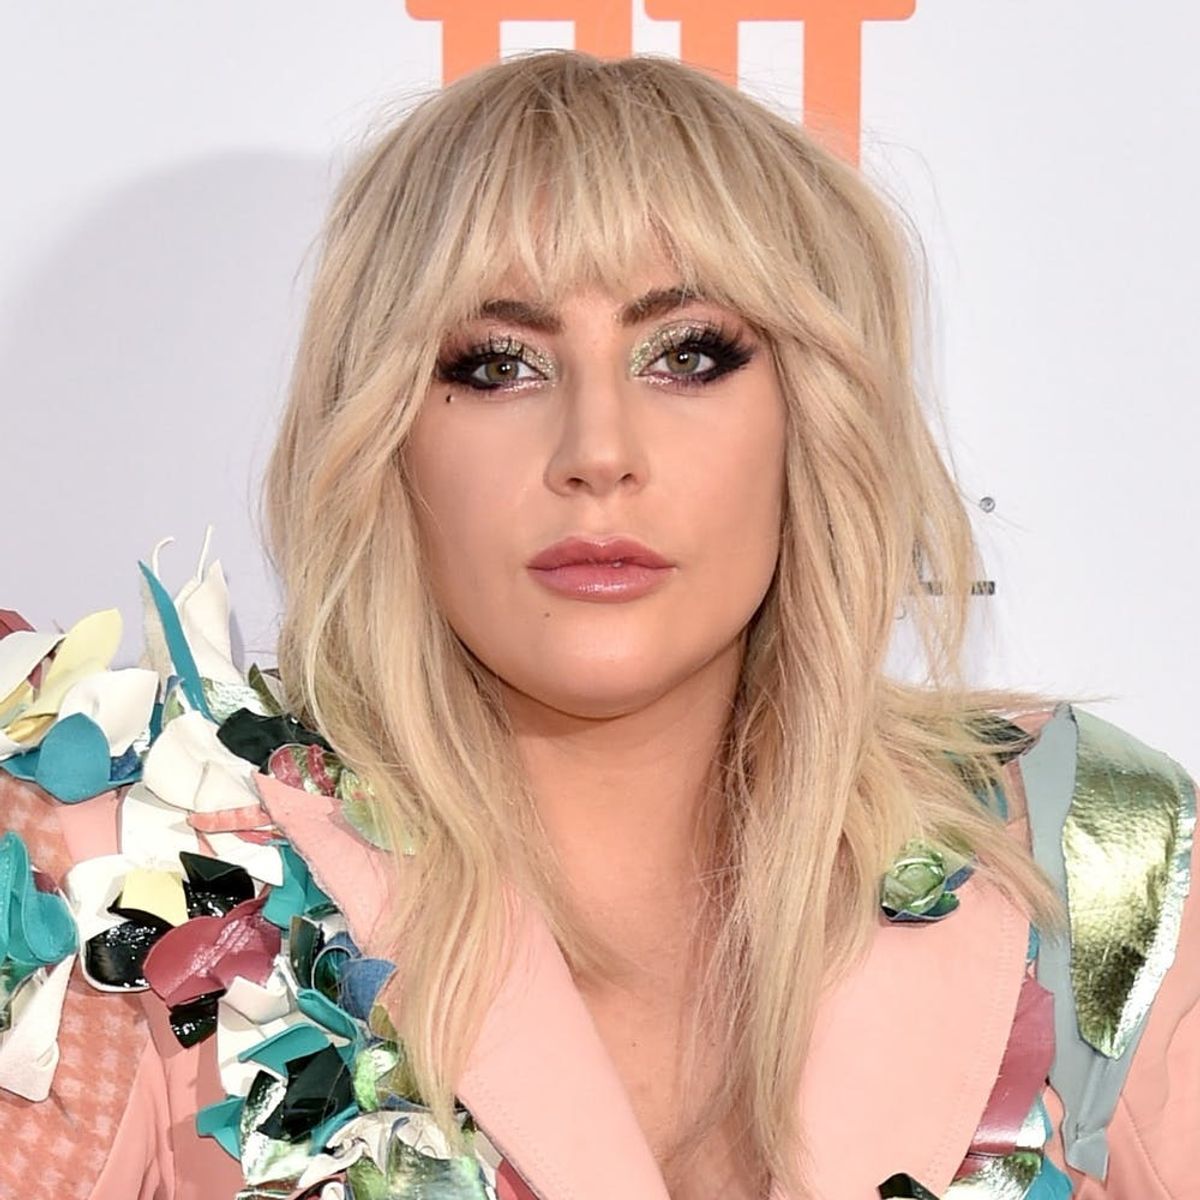 Lady Gaga Got Emotional While Opening Up About Her Struggles With Chronic Pain